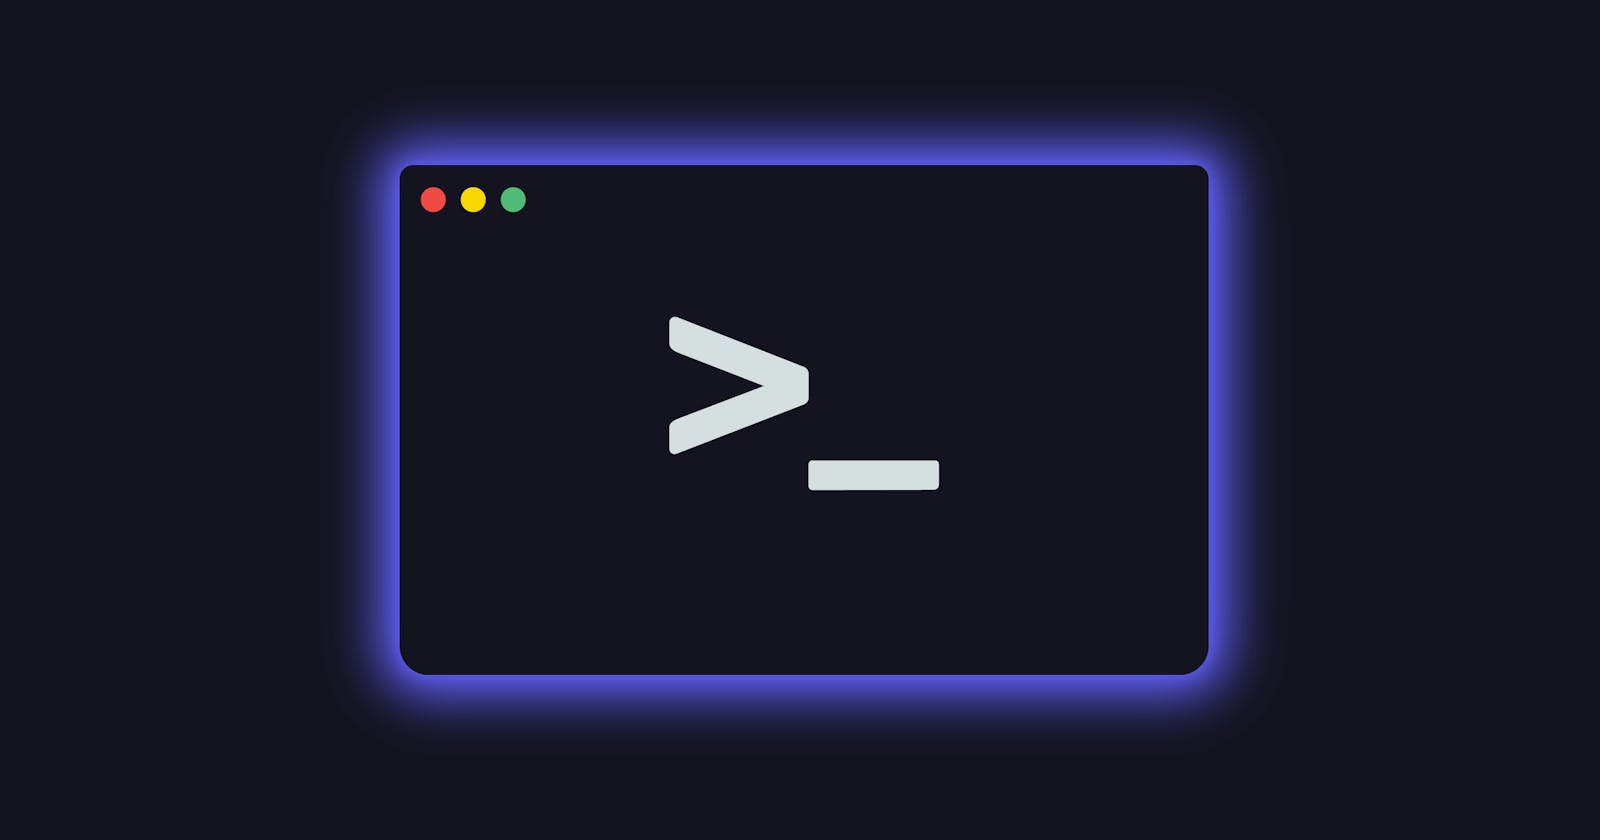 10 modern Terminal/CLI tools that will change your terminal experience